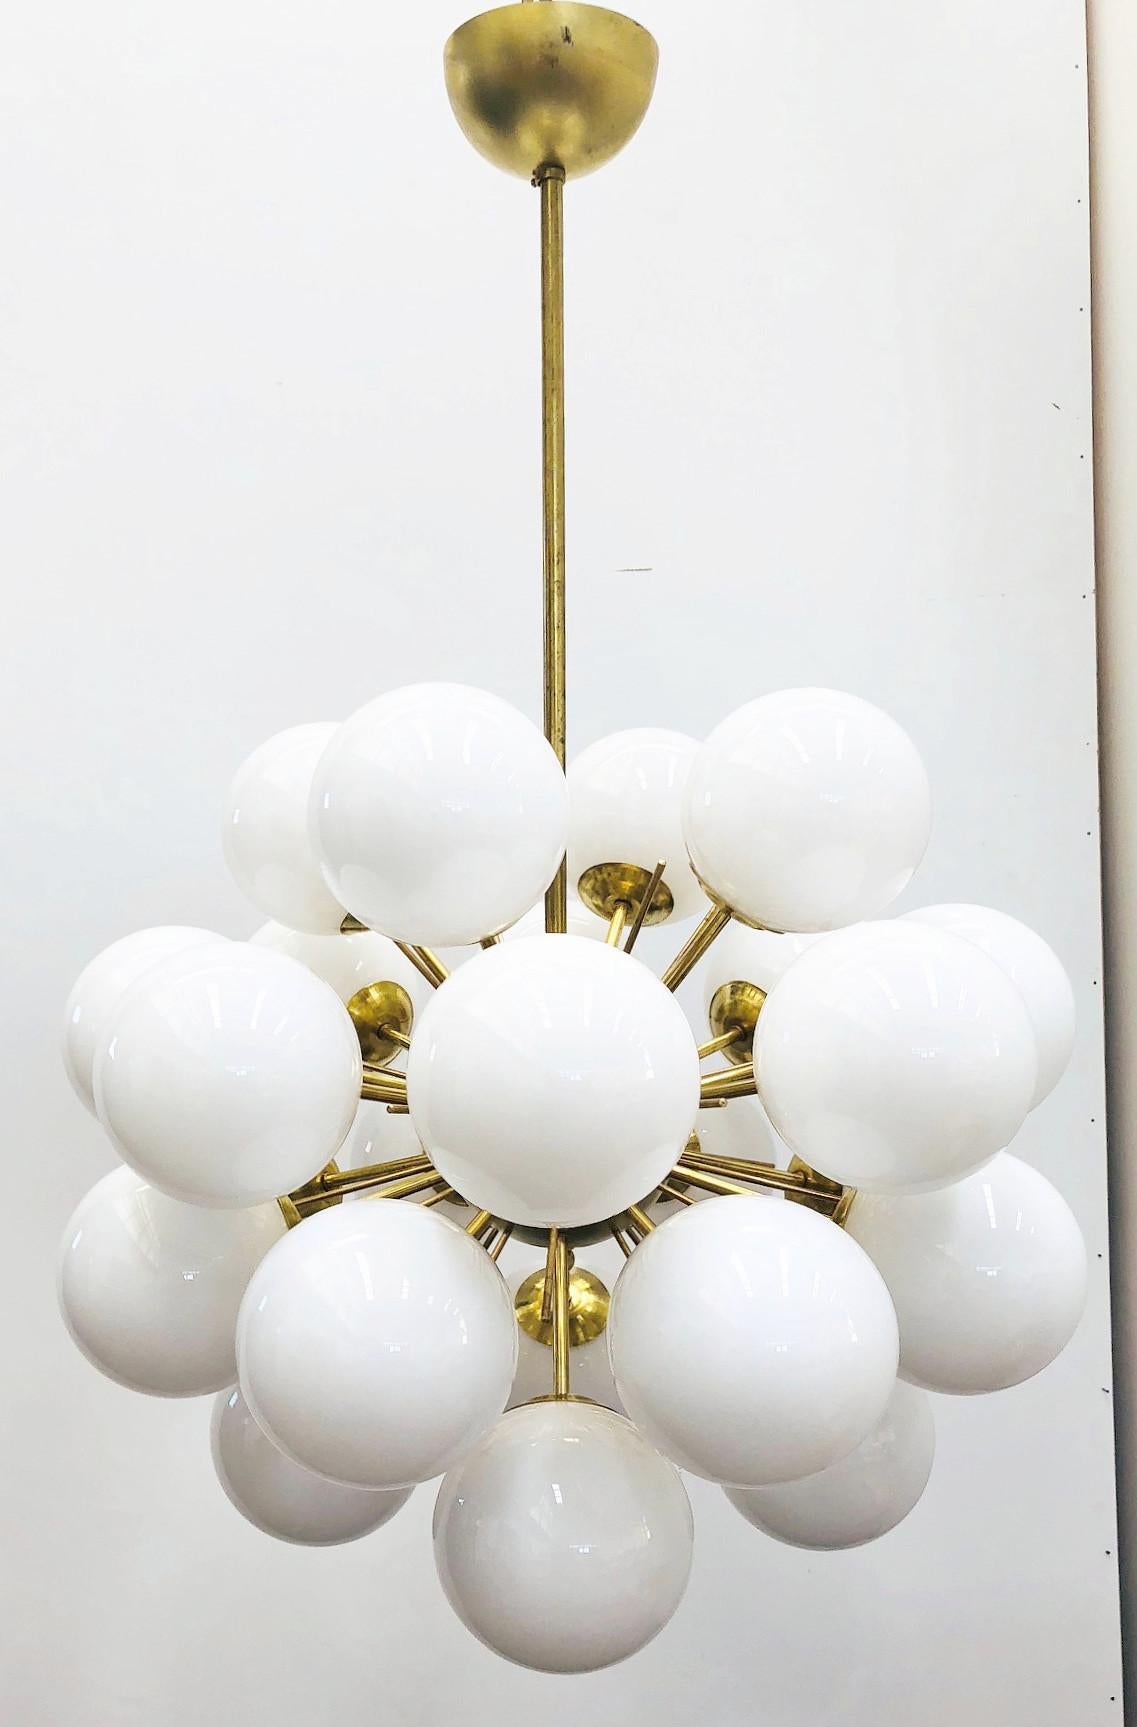 Italian sputnik chandelier with 24 Murano glass globes mounted on brass frame / Designed by Fabio Bergomi for Fabio Ltd / Made in Italy
24 lights / E12 or E14 type / max 40W each
Diameter: 28 inches / Height: 47 inches including rod and canopy
Order